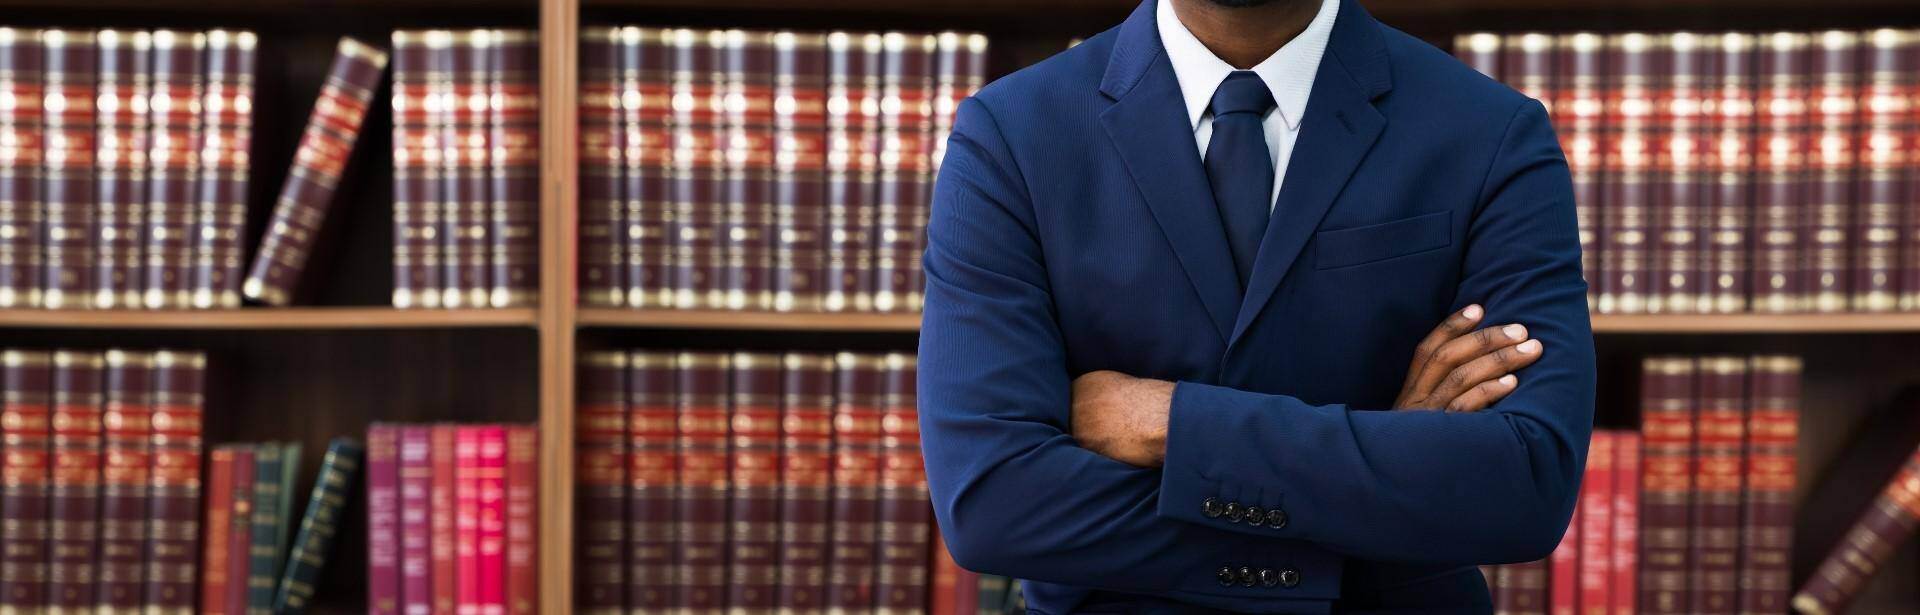 A black lawyer standing in front of a bookshelf of law book in Douglas, Georgia